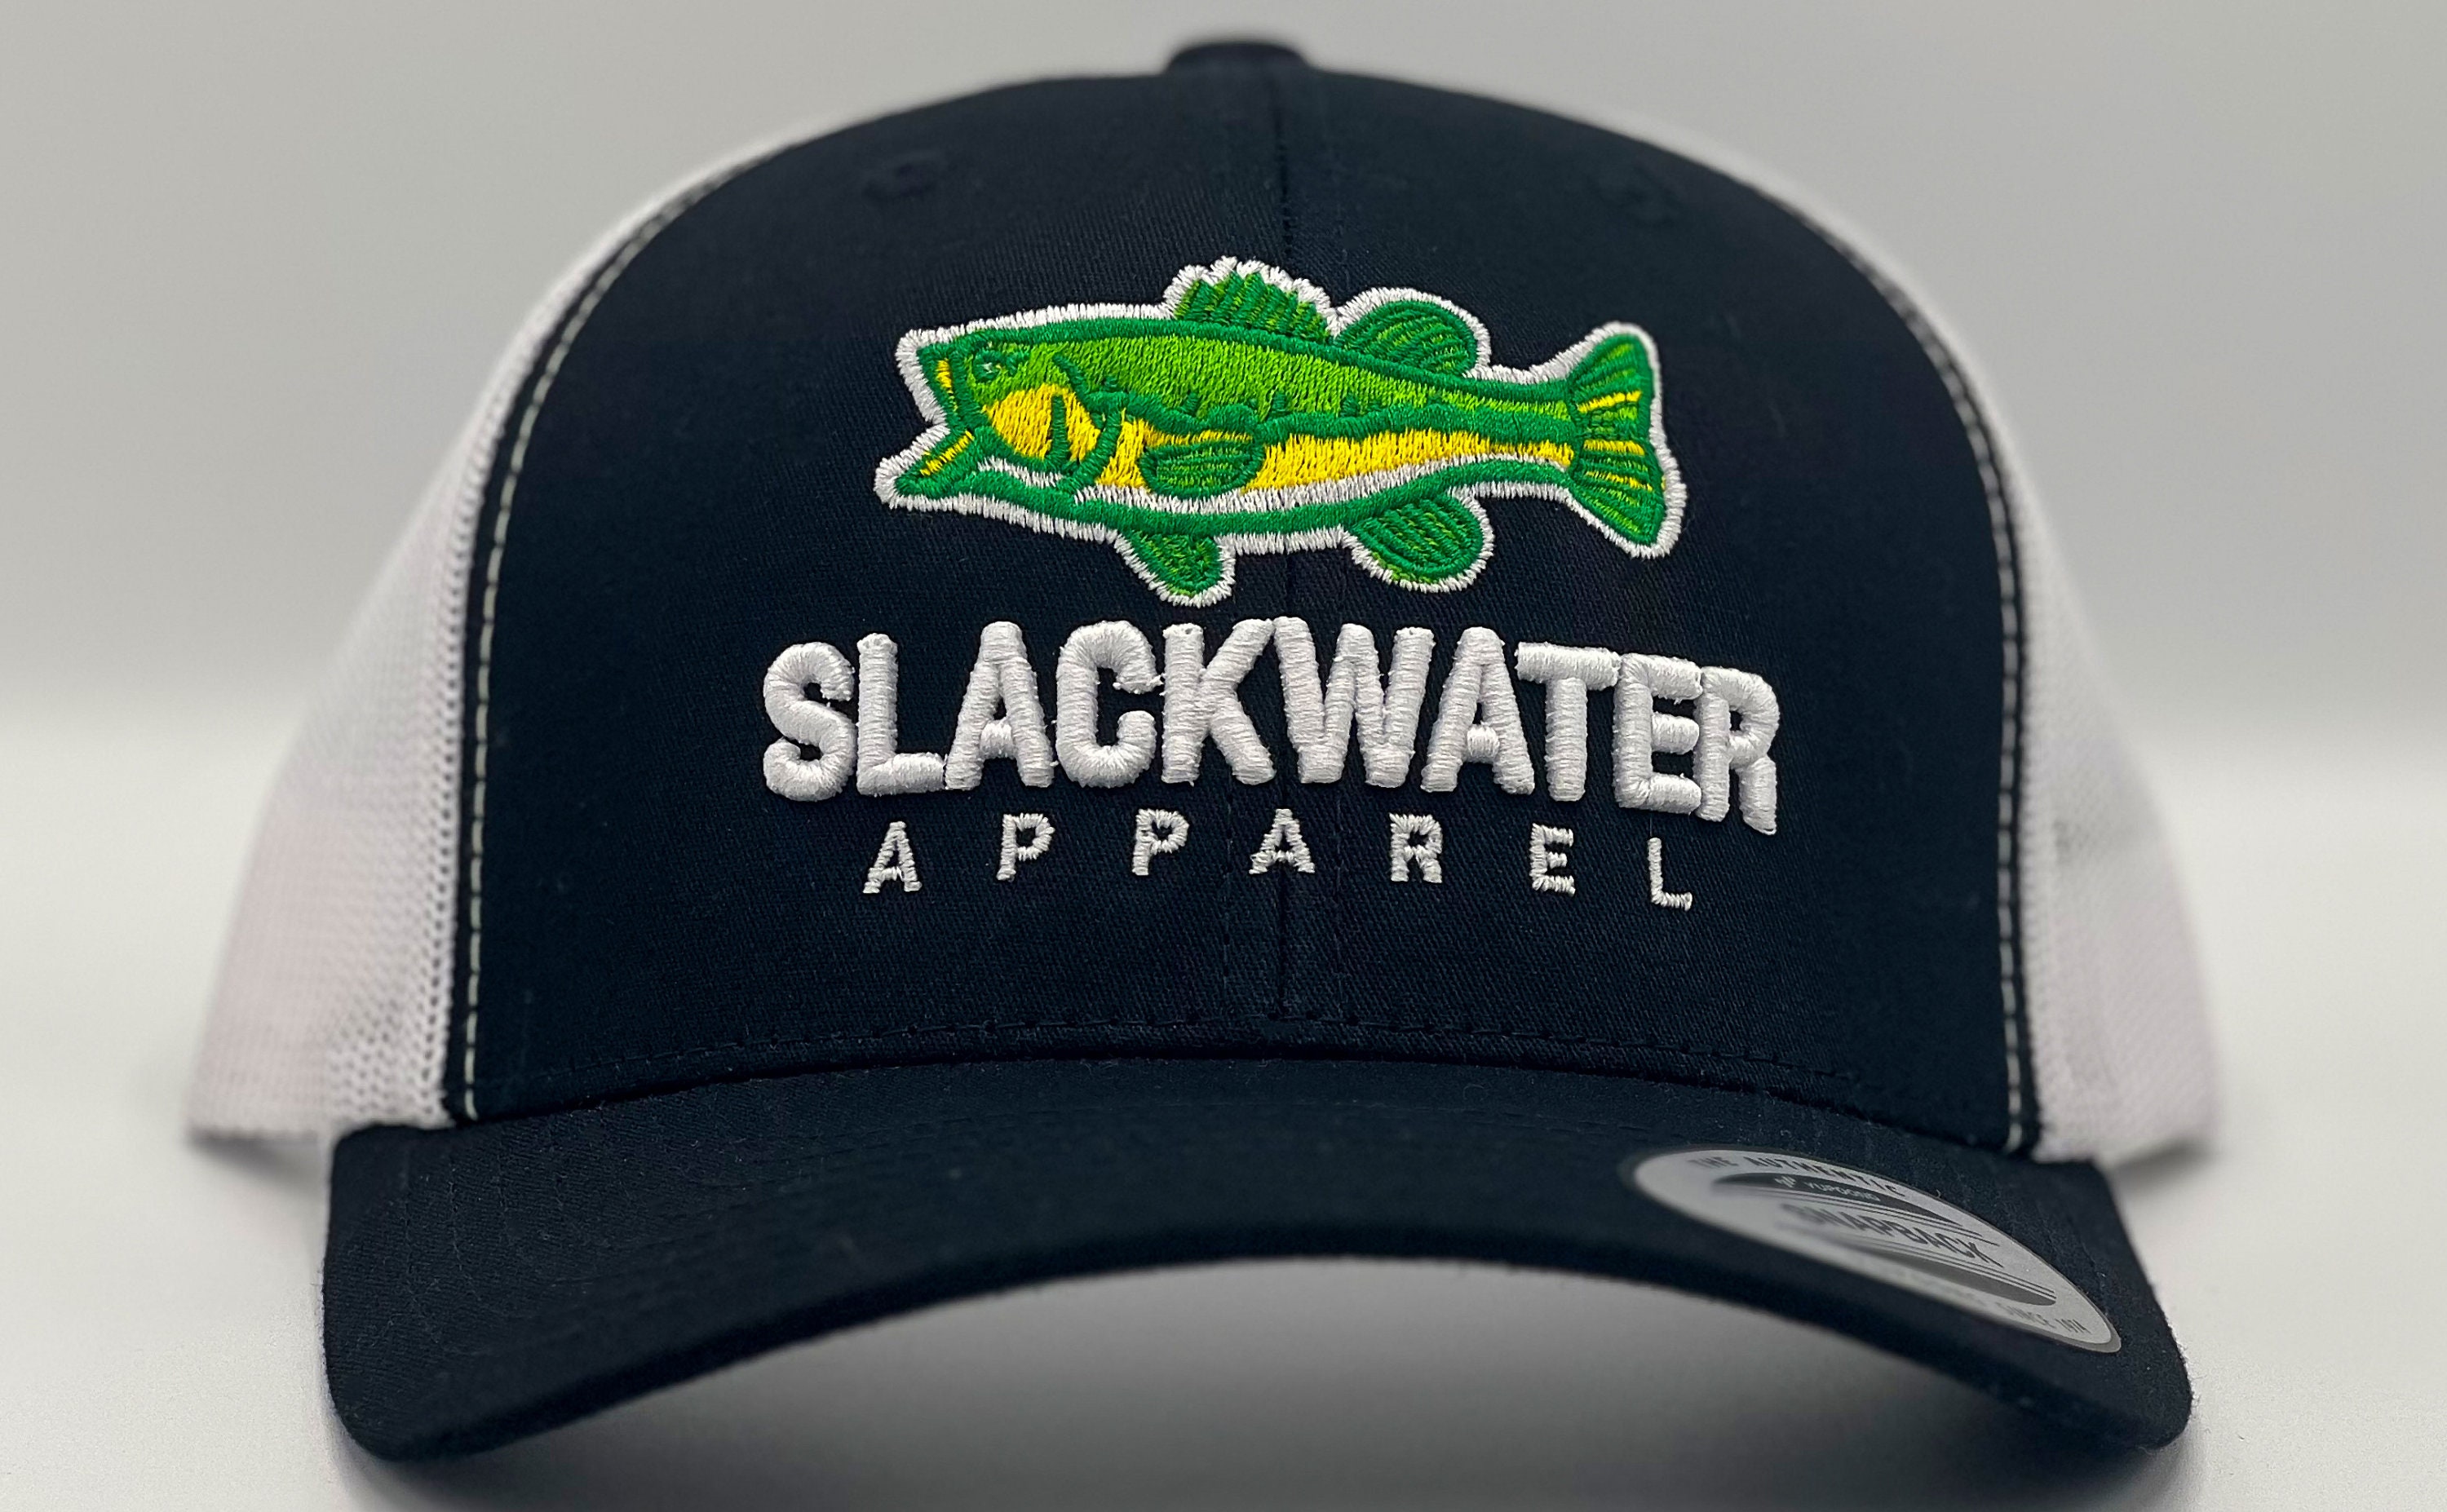 Black - White Largemouth Bass Trucker Snapback Hat - Adjustable Unisex Bass  Fishing Hat - High Quality Embroidered Logo Outdoor Apparel Gear